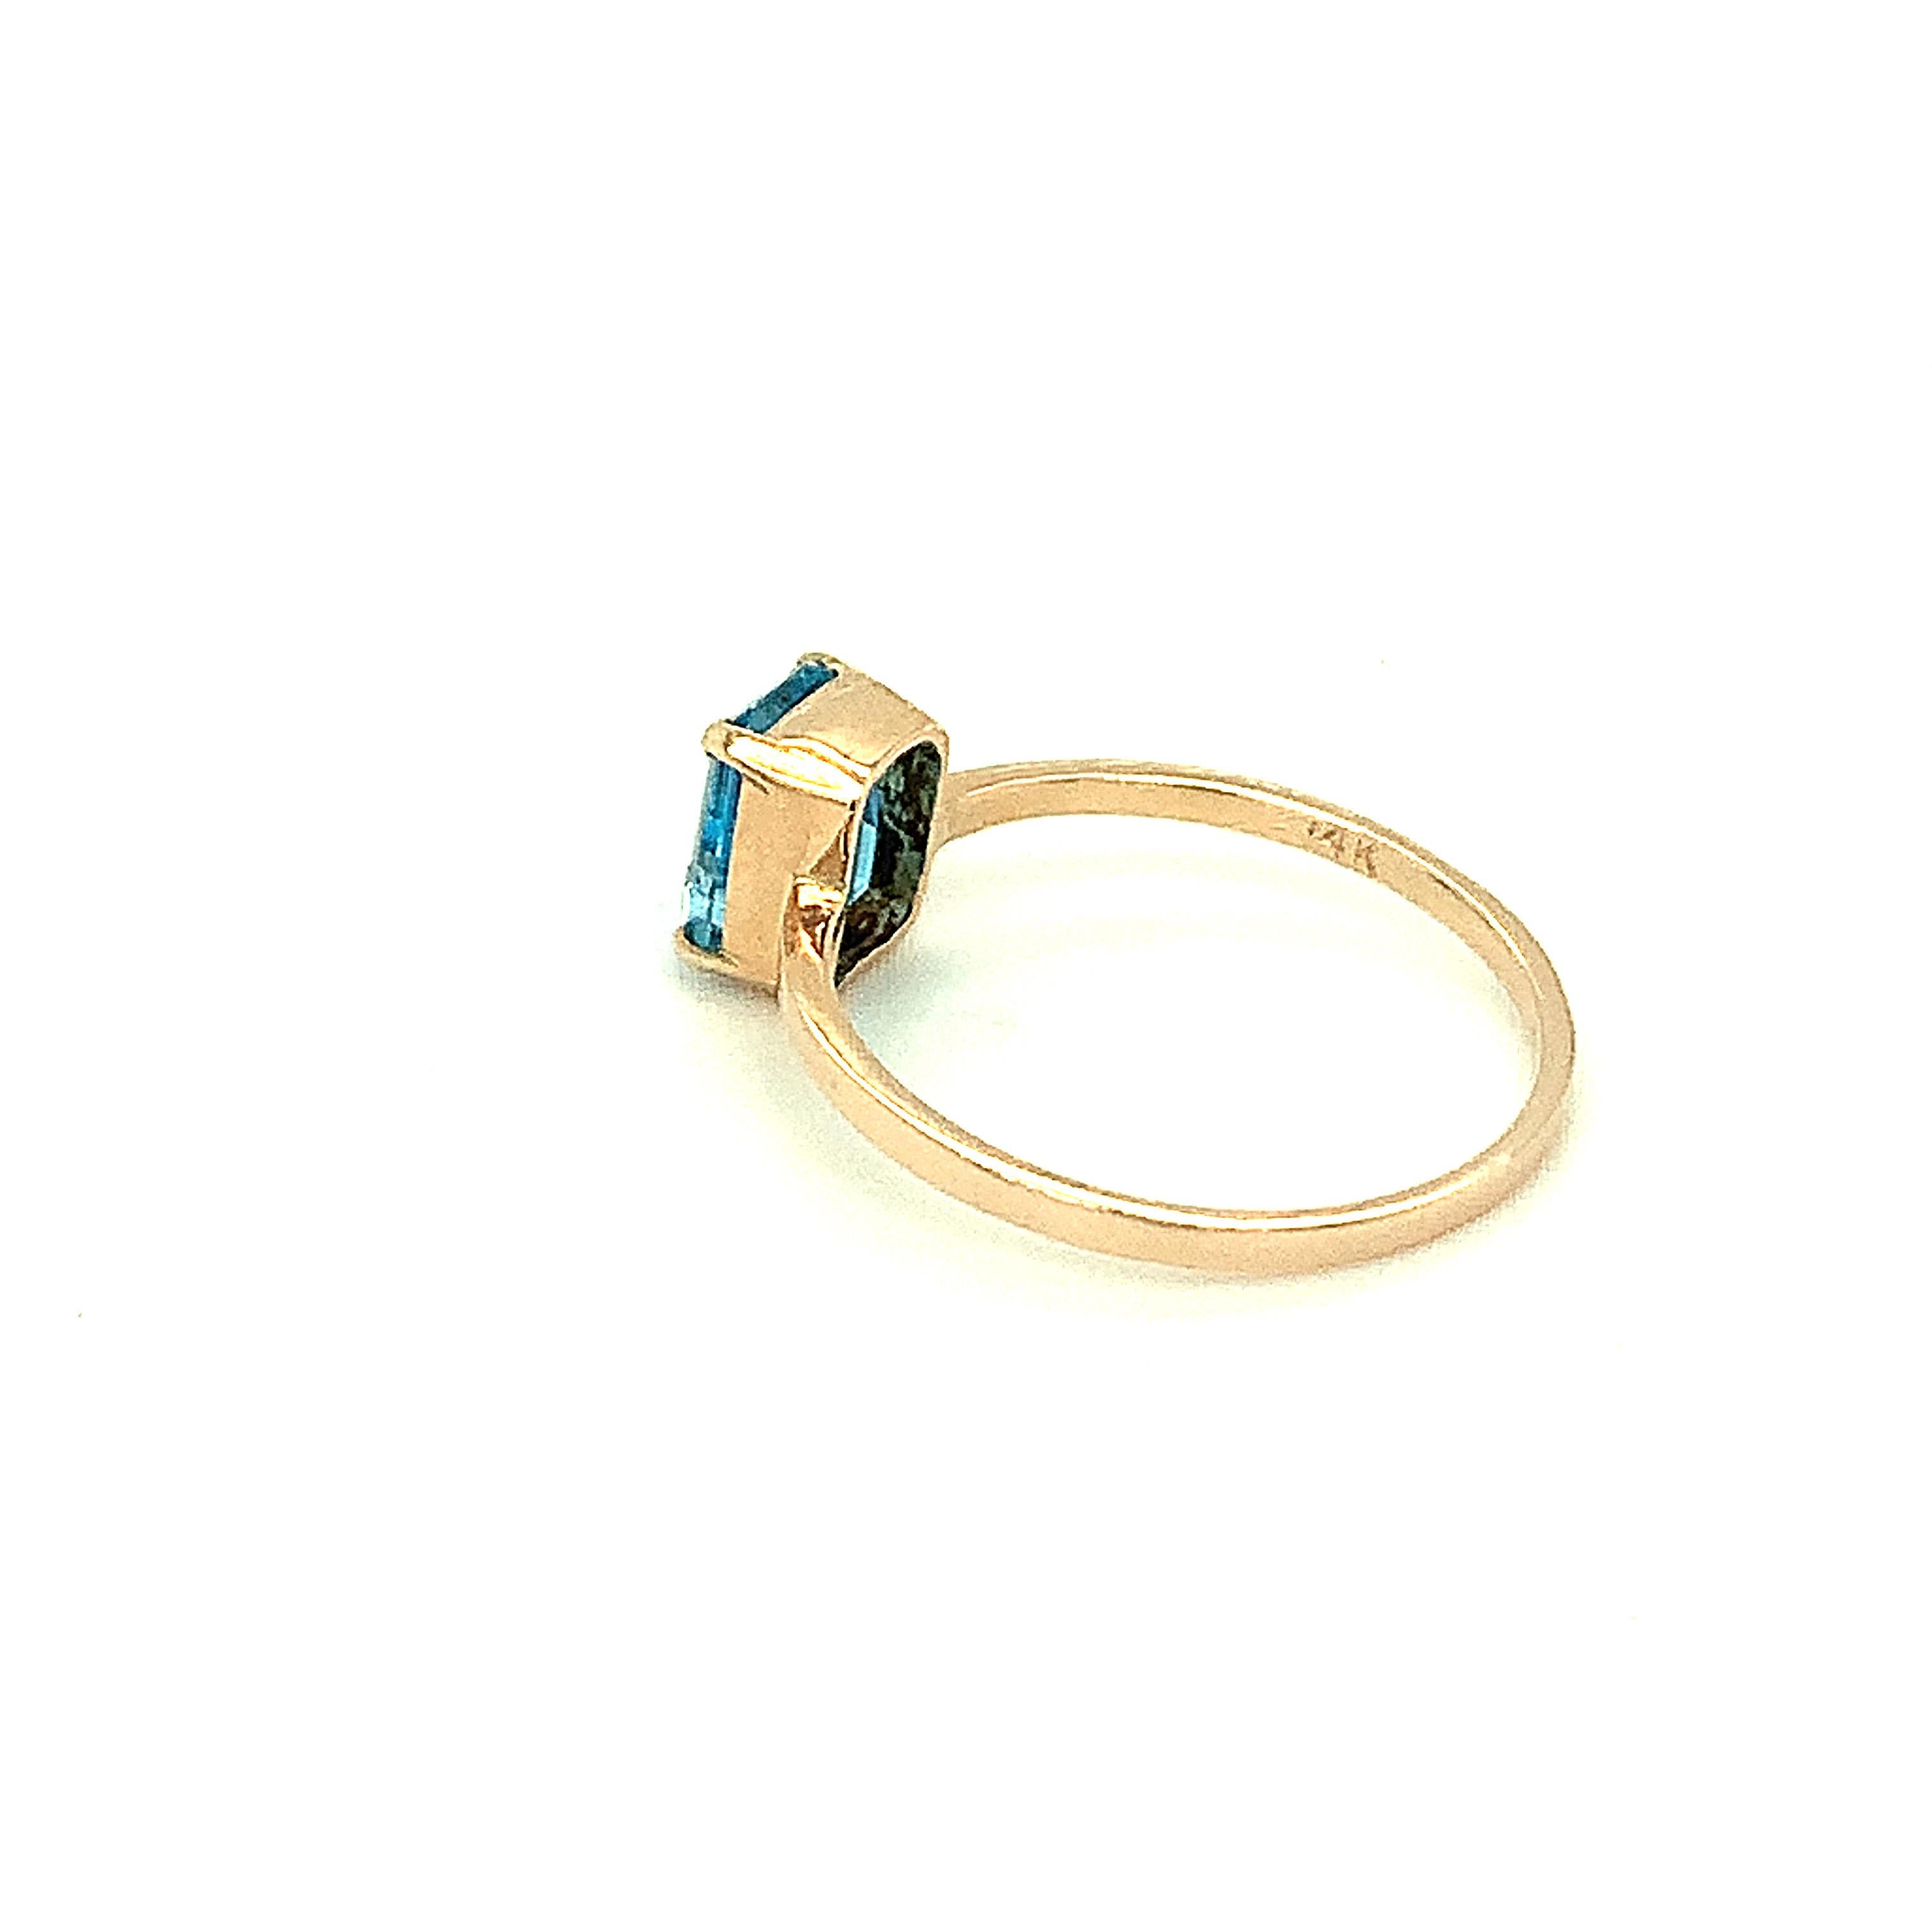 Swiss Blue blue topaz is set with four prongs thin band in 14K yellow gold. 
This simple setting is suitable for daily wear. 
Beautifully made by hand.
Ethically sourced natural gem stone.